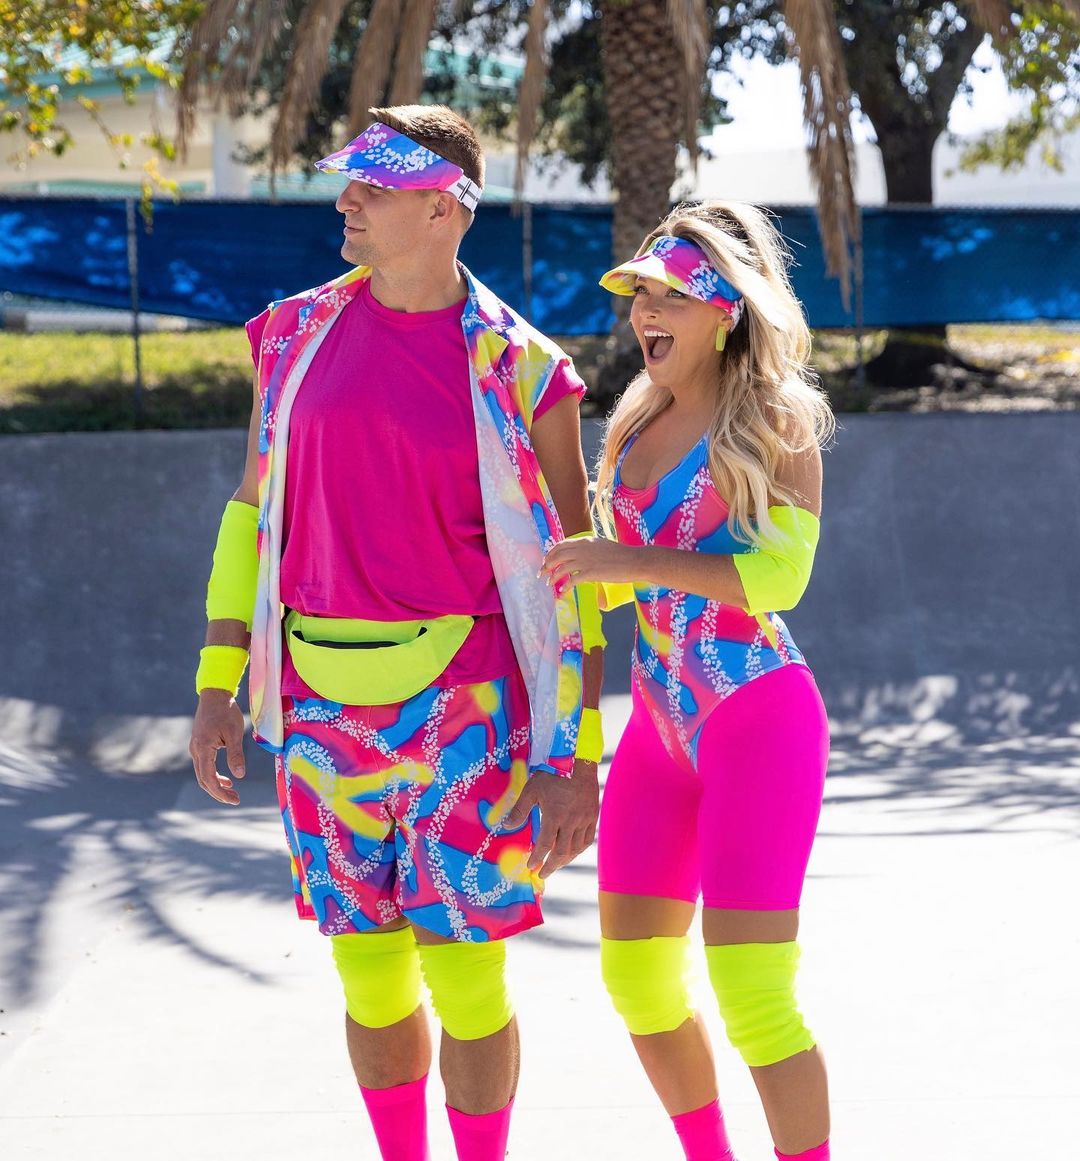 Photos n°4 : Gronk and Camille Kostek as Margot Robbie and Ryan Gosling’s Ken and Barbie!